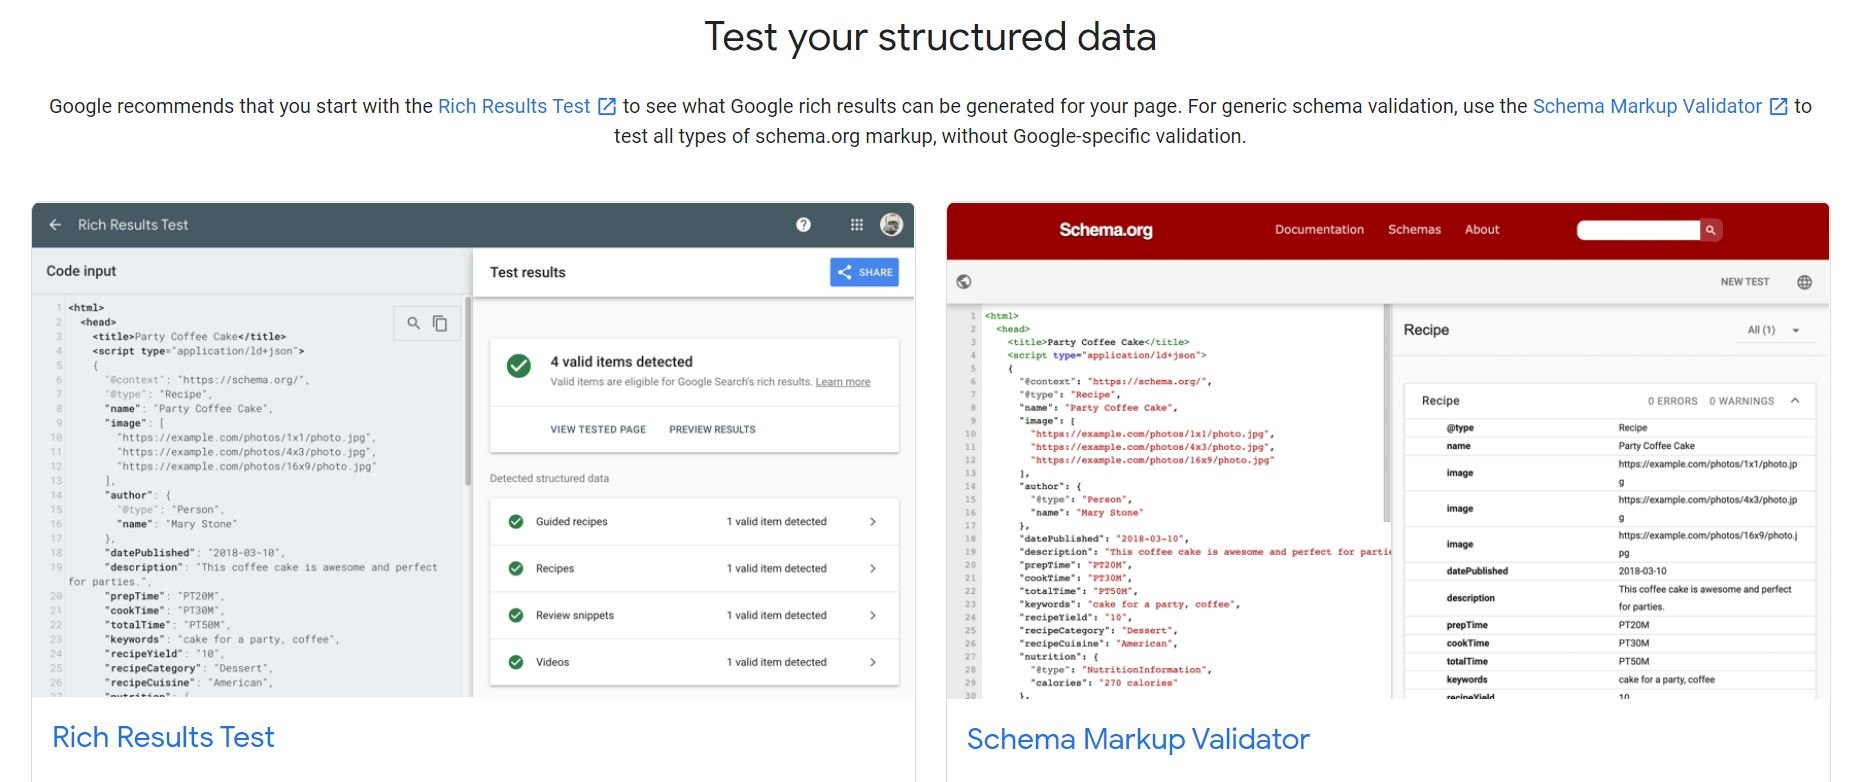 The Structured Data Test